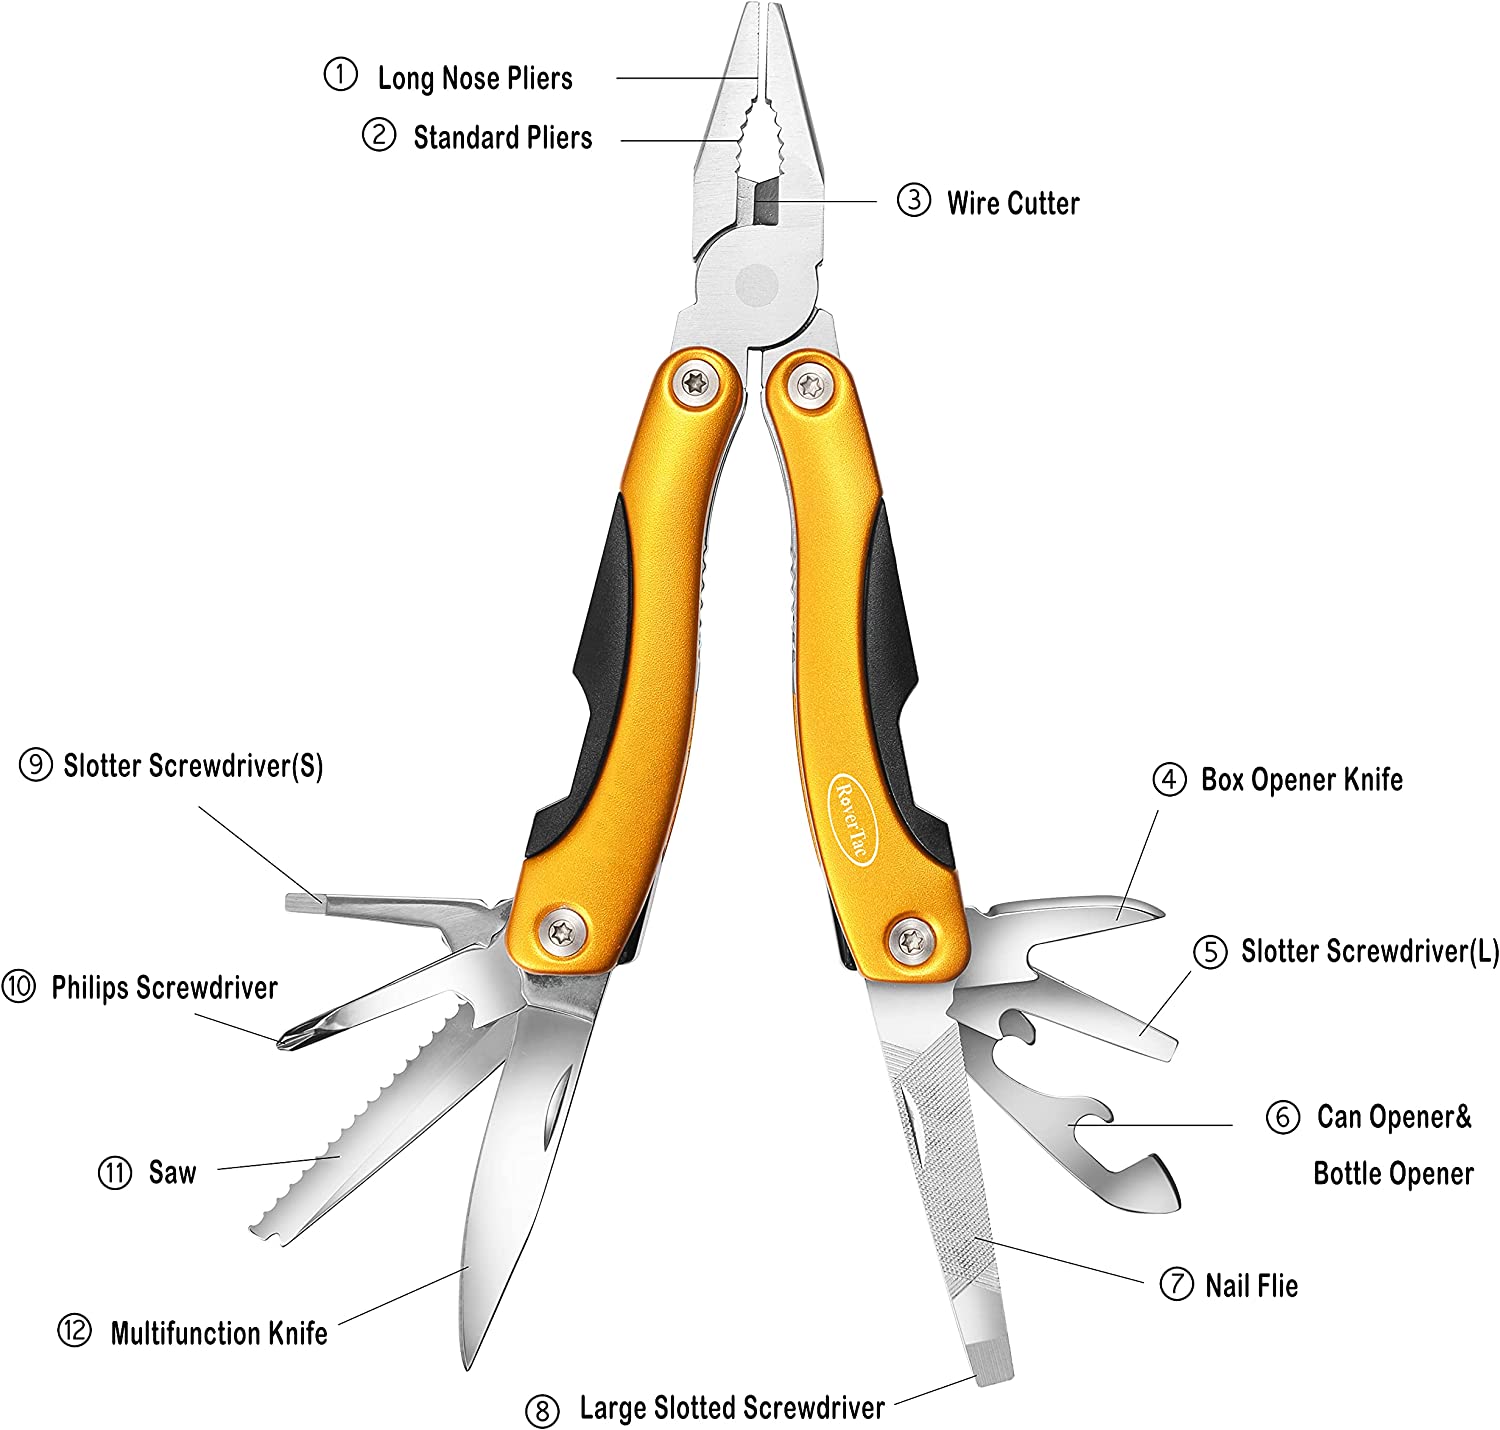 Multitool Knife Pliers with Safety Lock 12 in 1，Screwdriver Saw Bottle Opener for Camping Survival Hiking Fishing